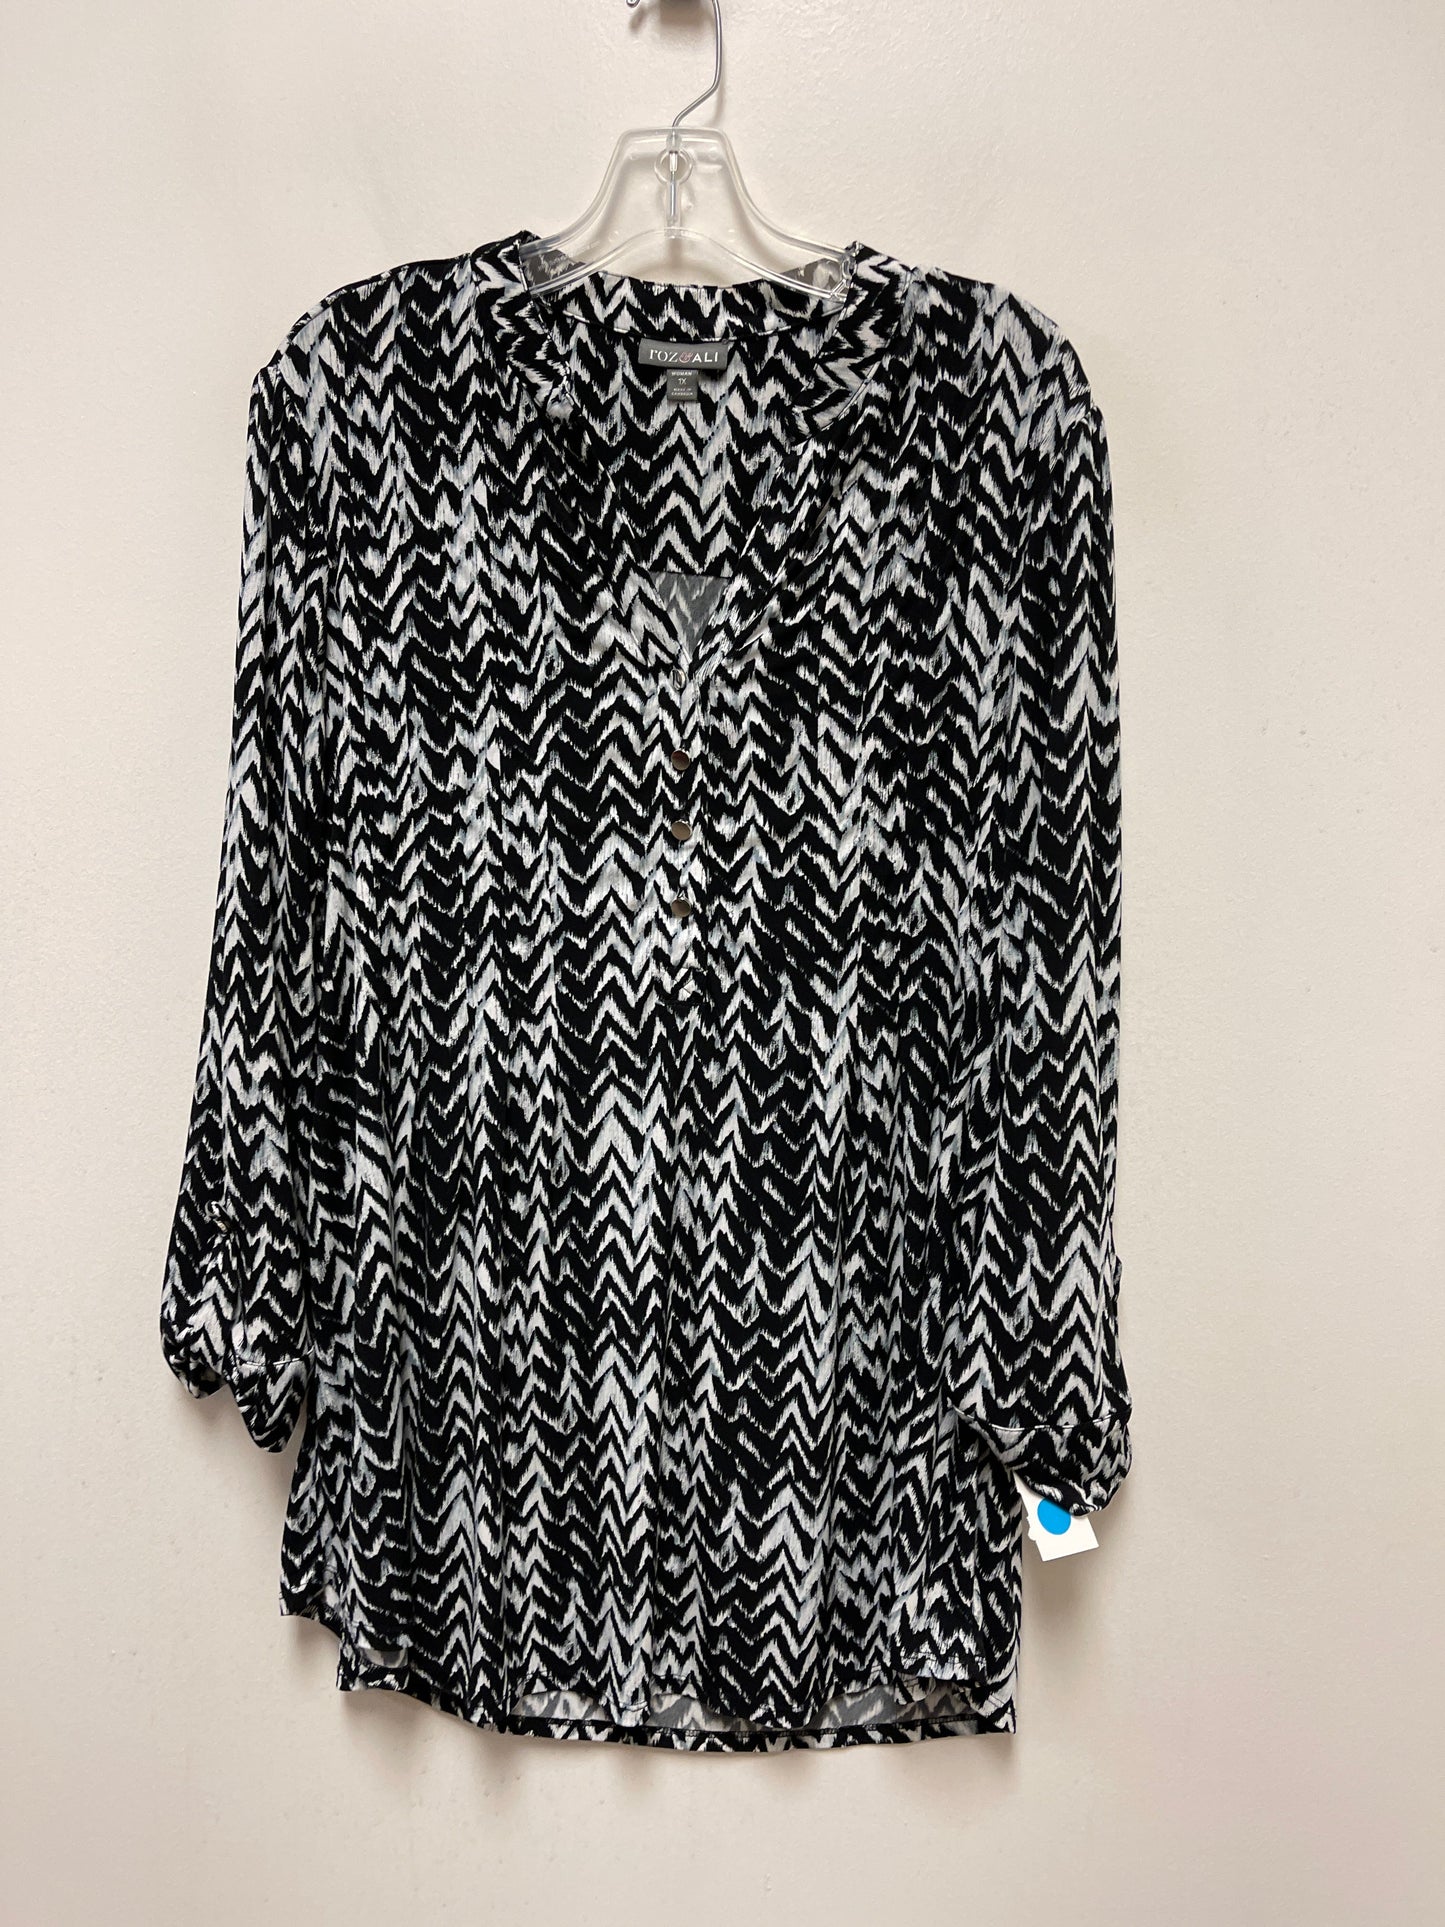 Black & White Top Long Sleeve Roz And Ali, Size 1x